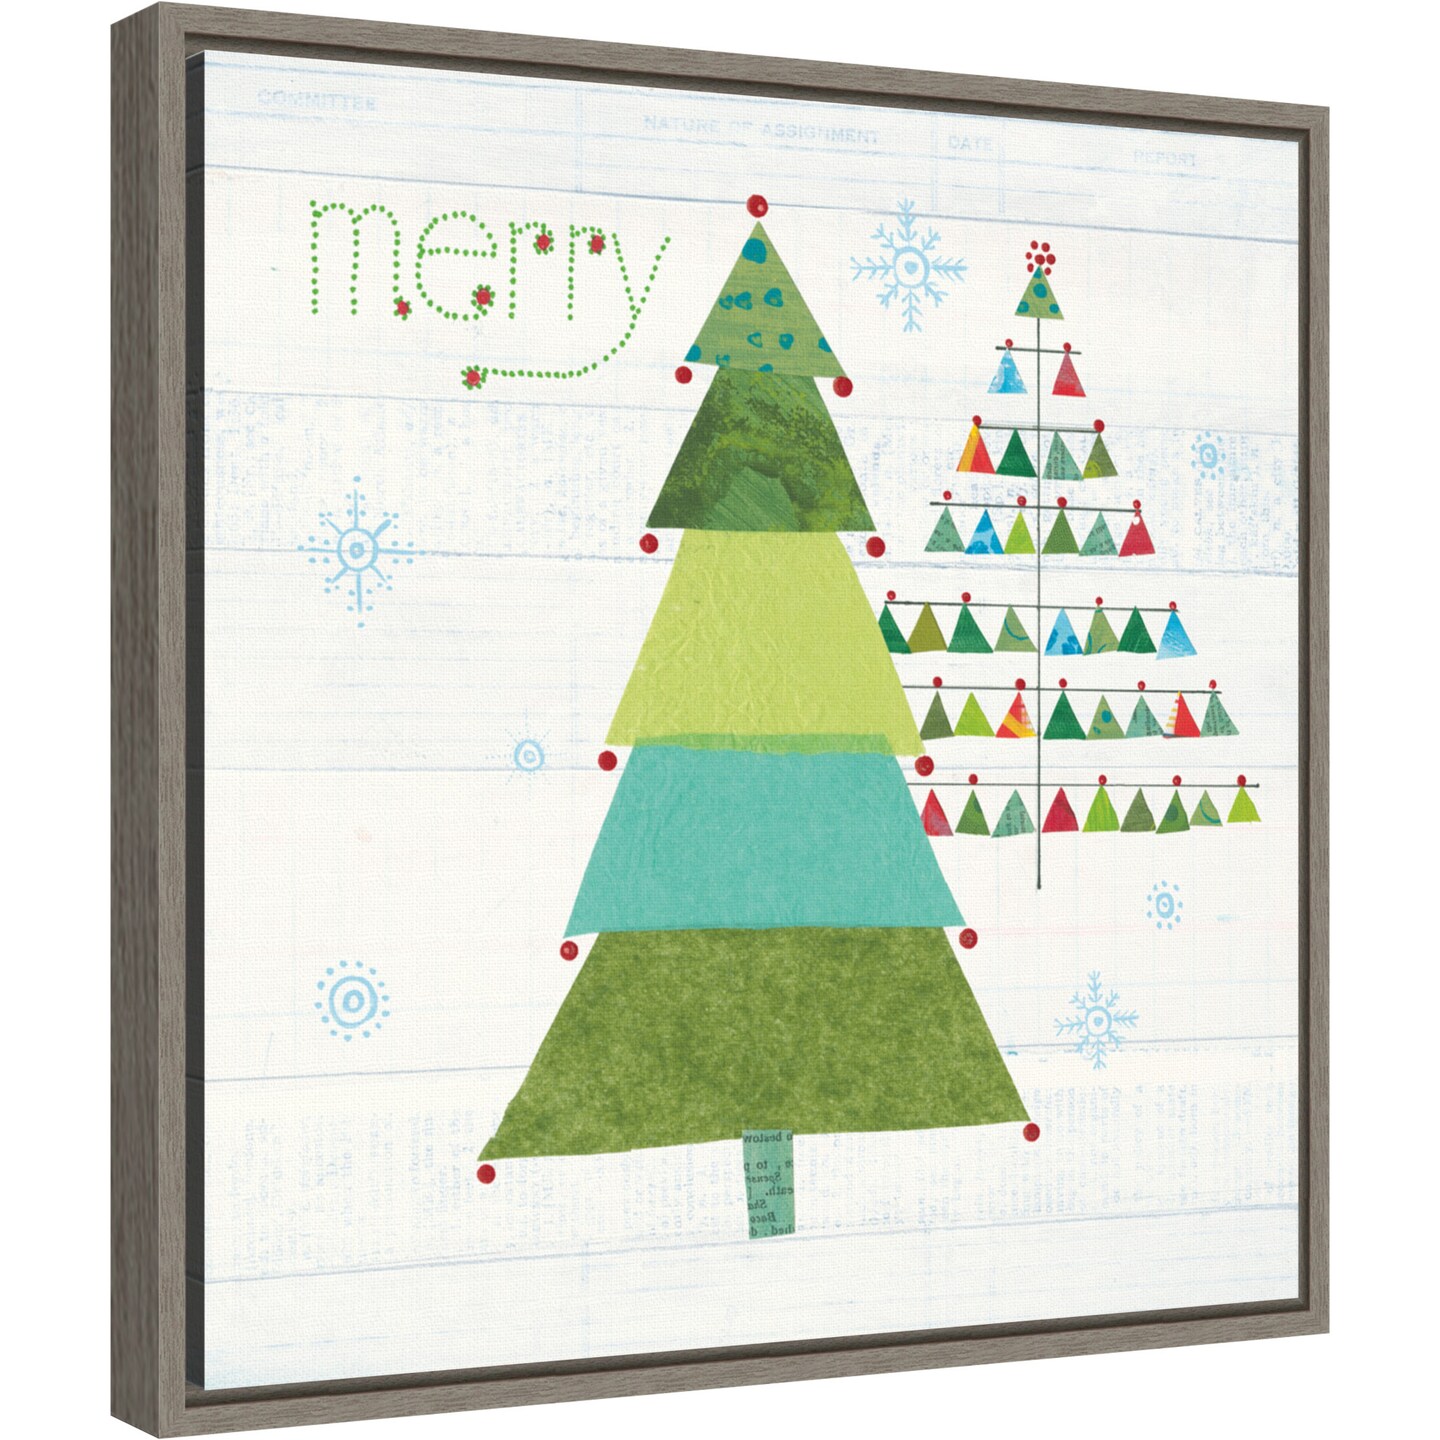 Christmas Patchwork I (Tree) by Courtney Prahl 16-in. W x 16-in. H. Canvas Wall Art Print Framed in Grey